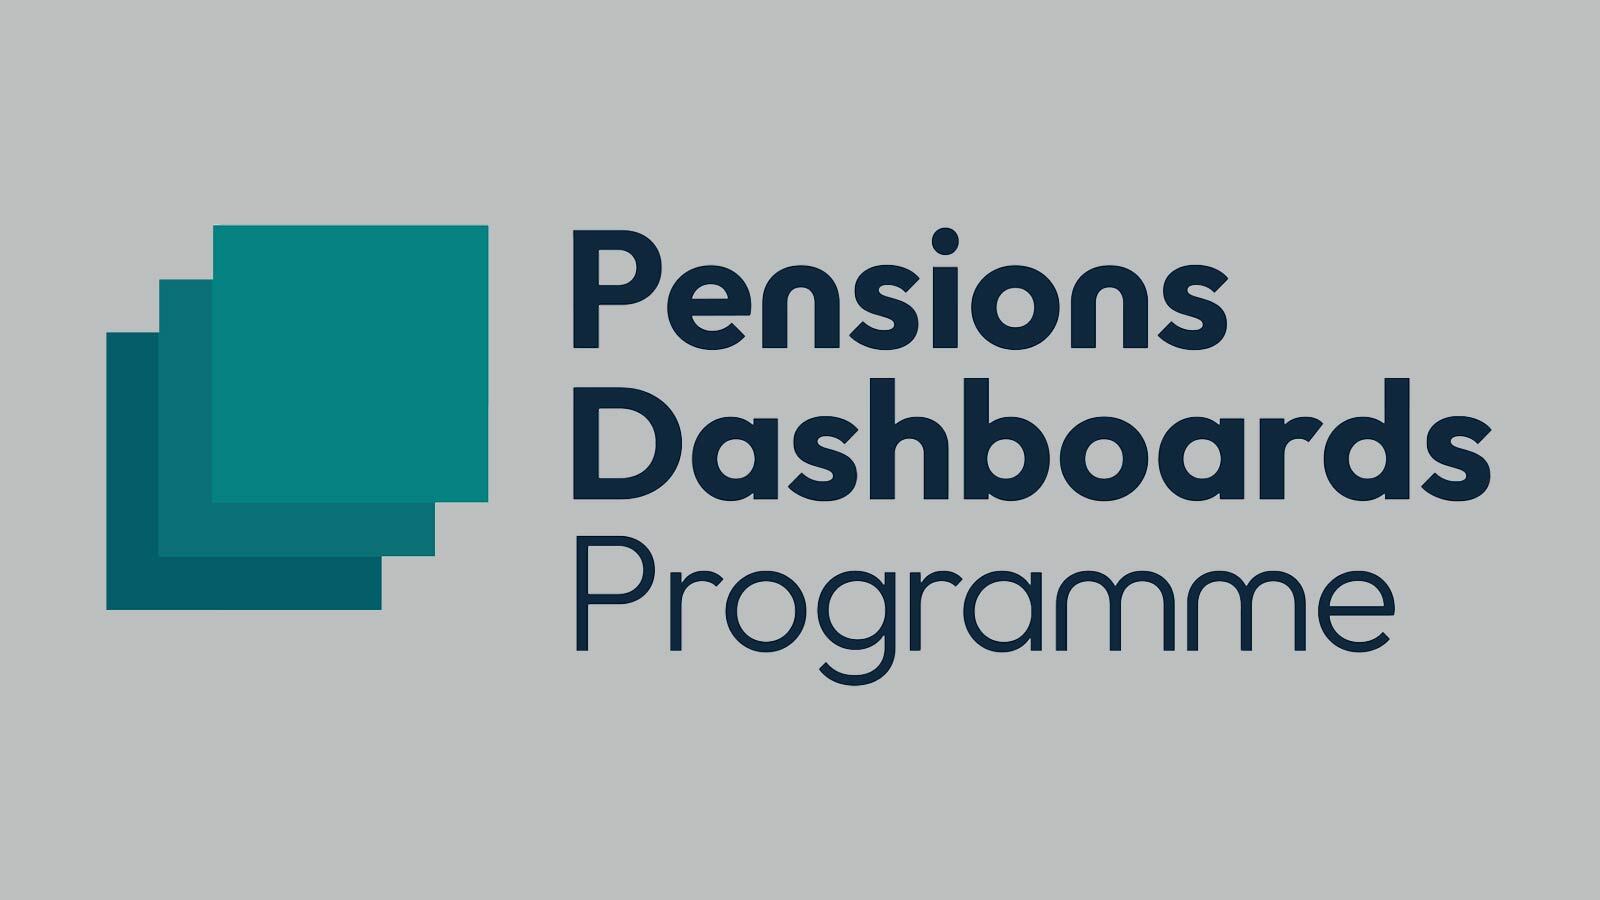 Image of The Pensions Dashboard